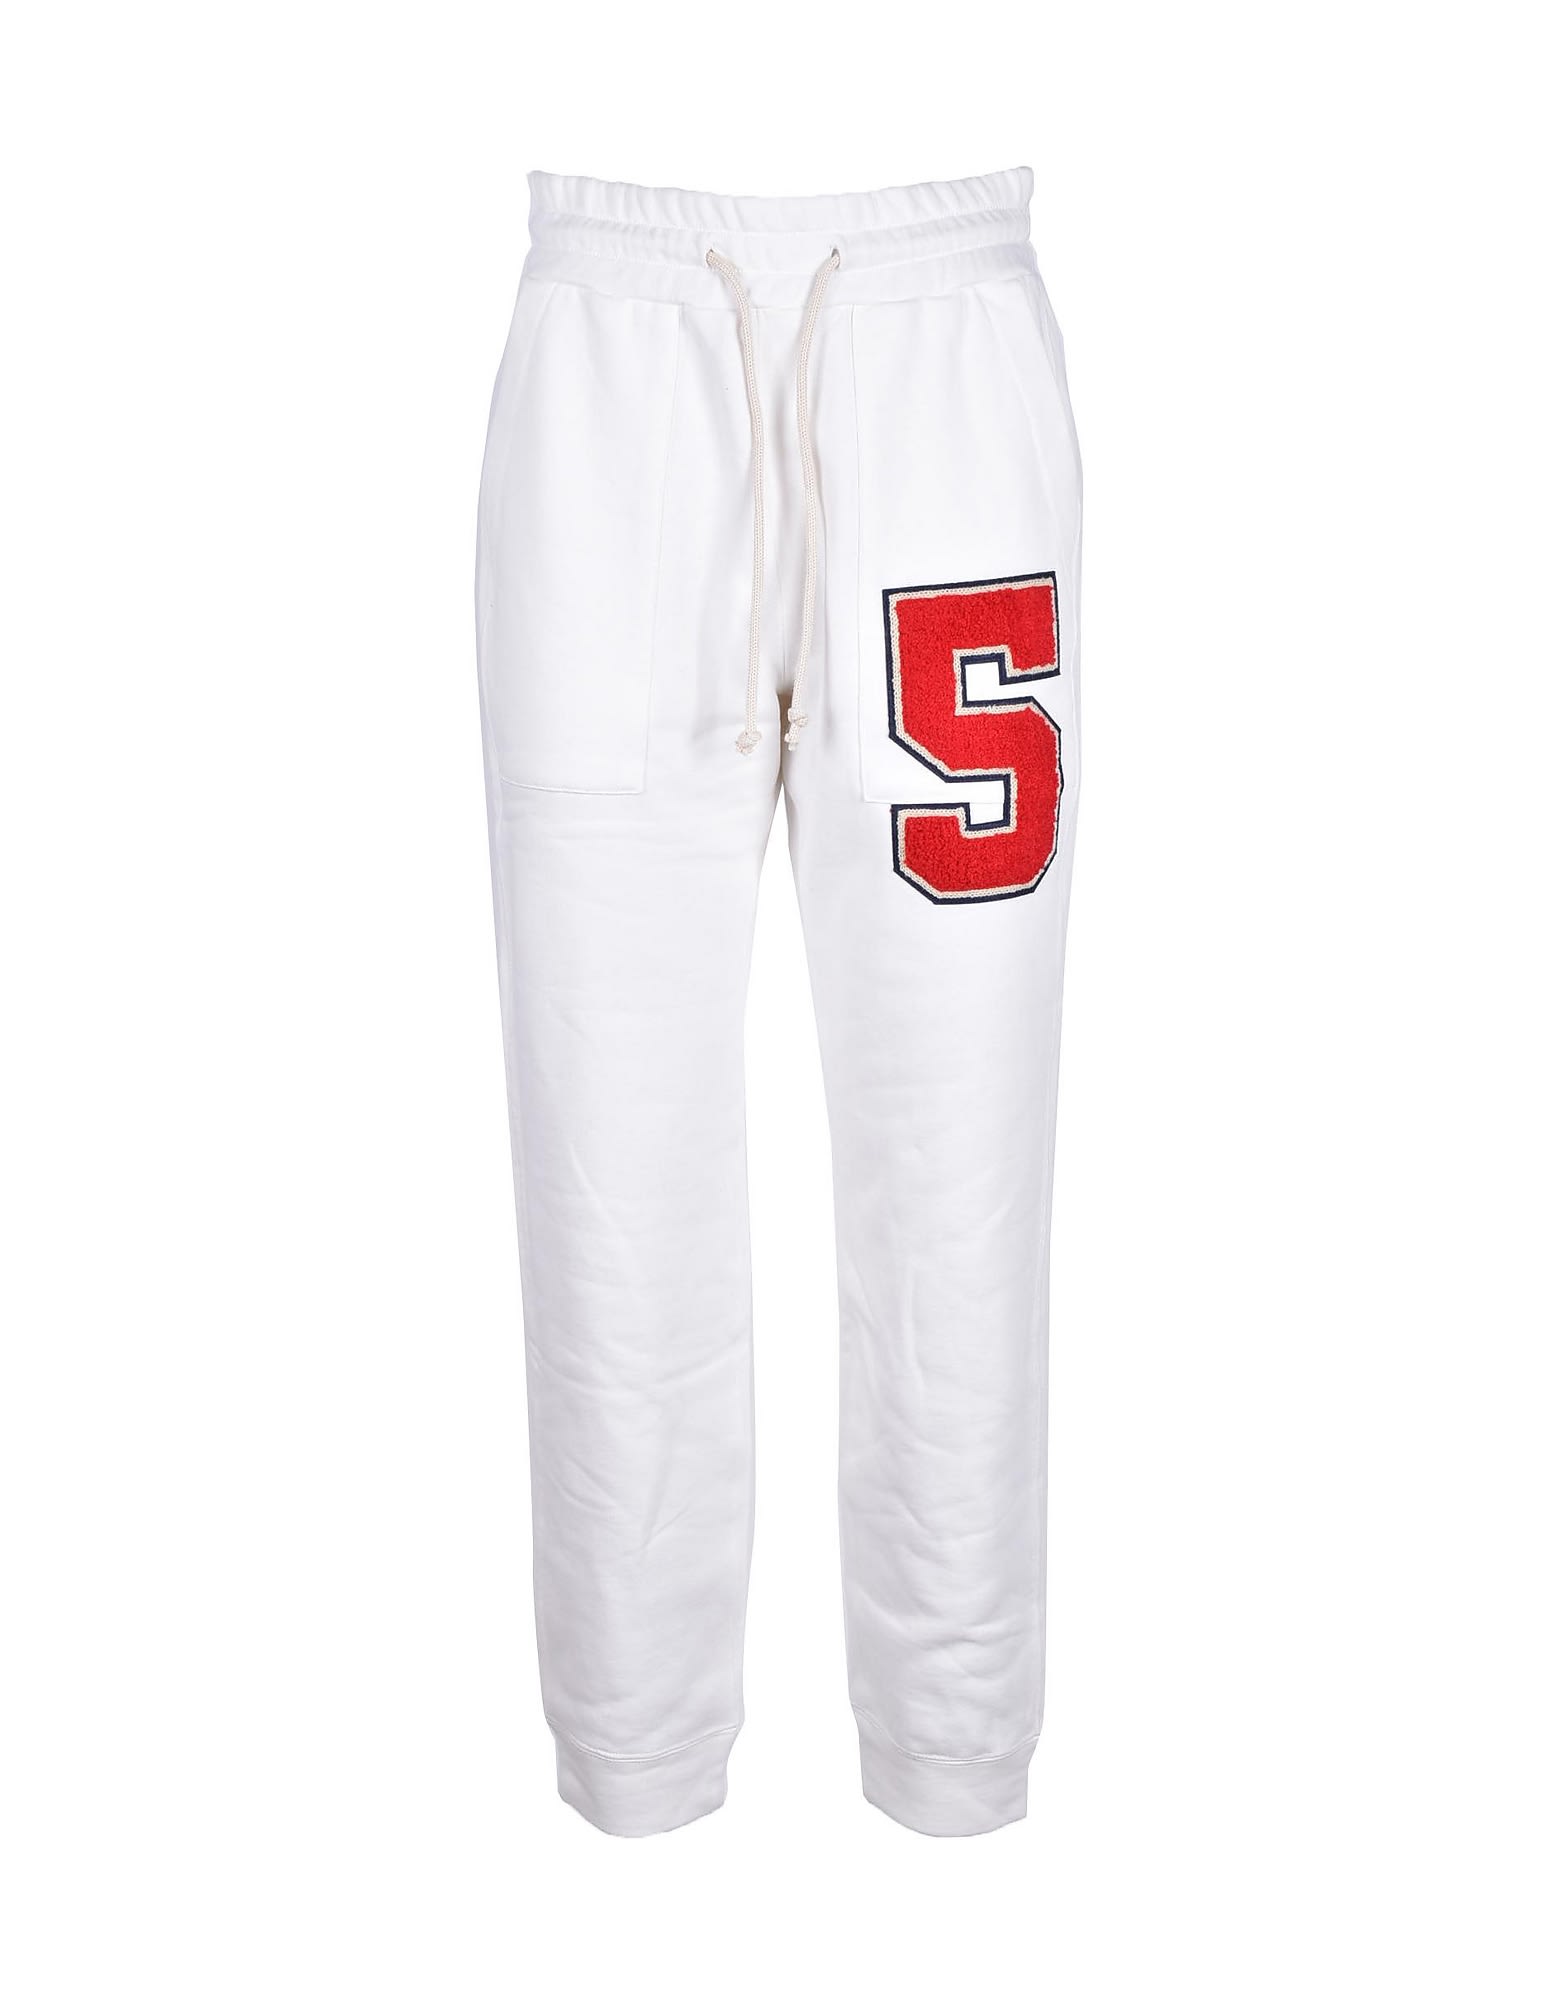 Department Five Womens White Pants